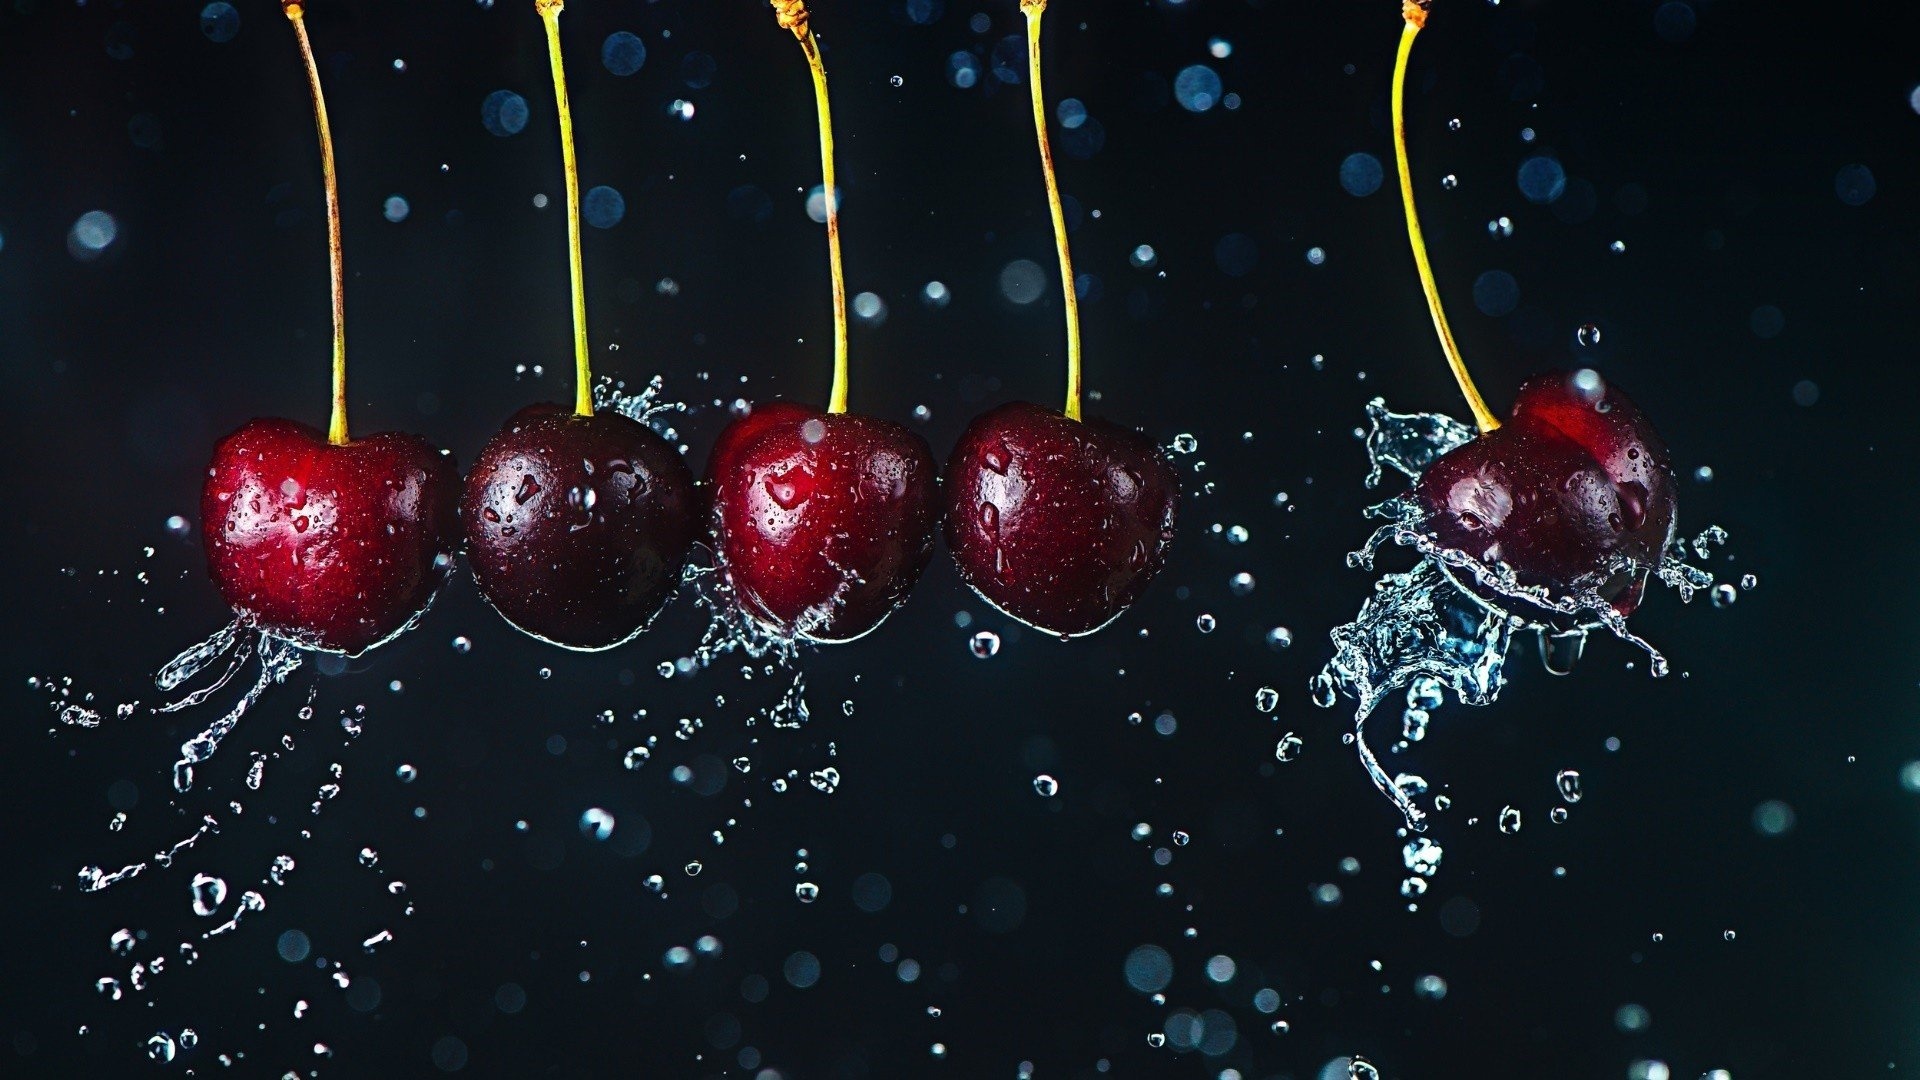 Cherry: Stone fruit, High in antioxidants and anti-inflammatory compounds. 1920x1080 Full HD Background.